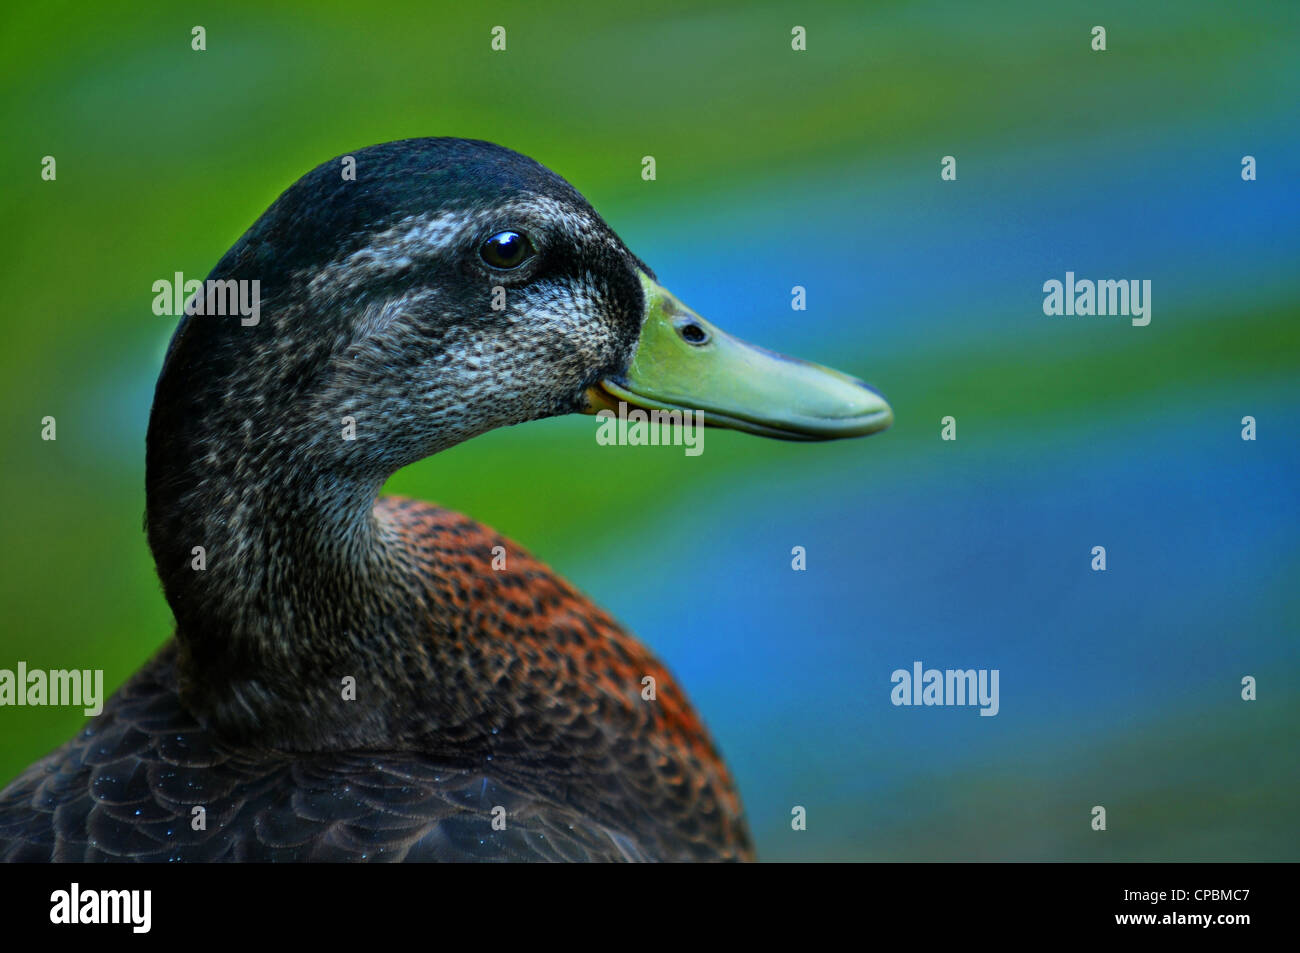 wood duck female profile portrait with green and blue pond reflecting Stock Photo